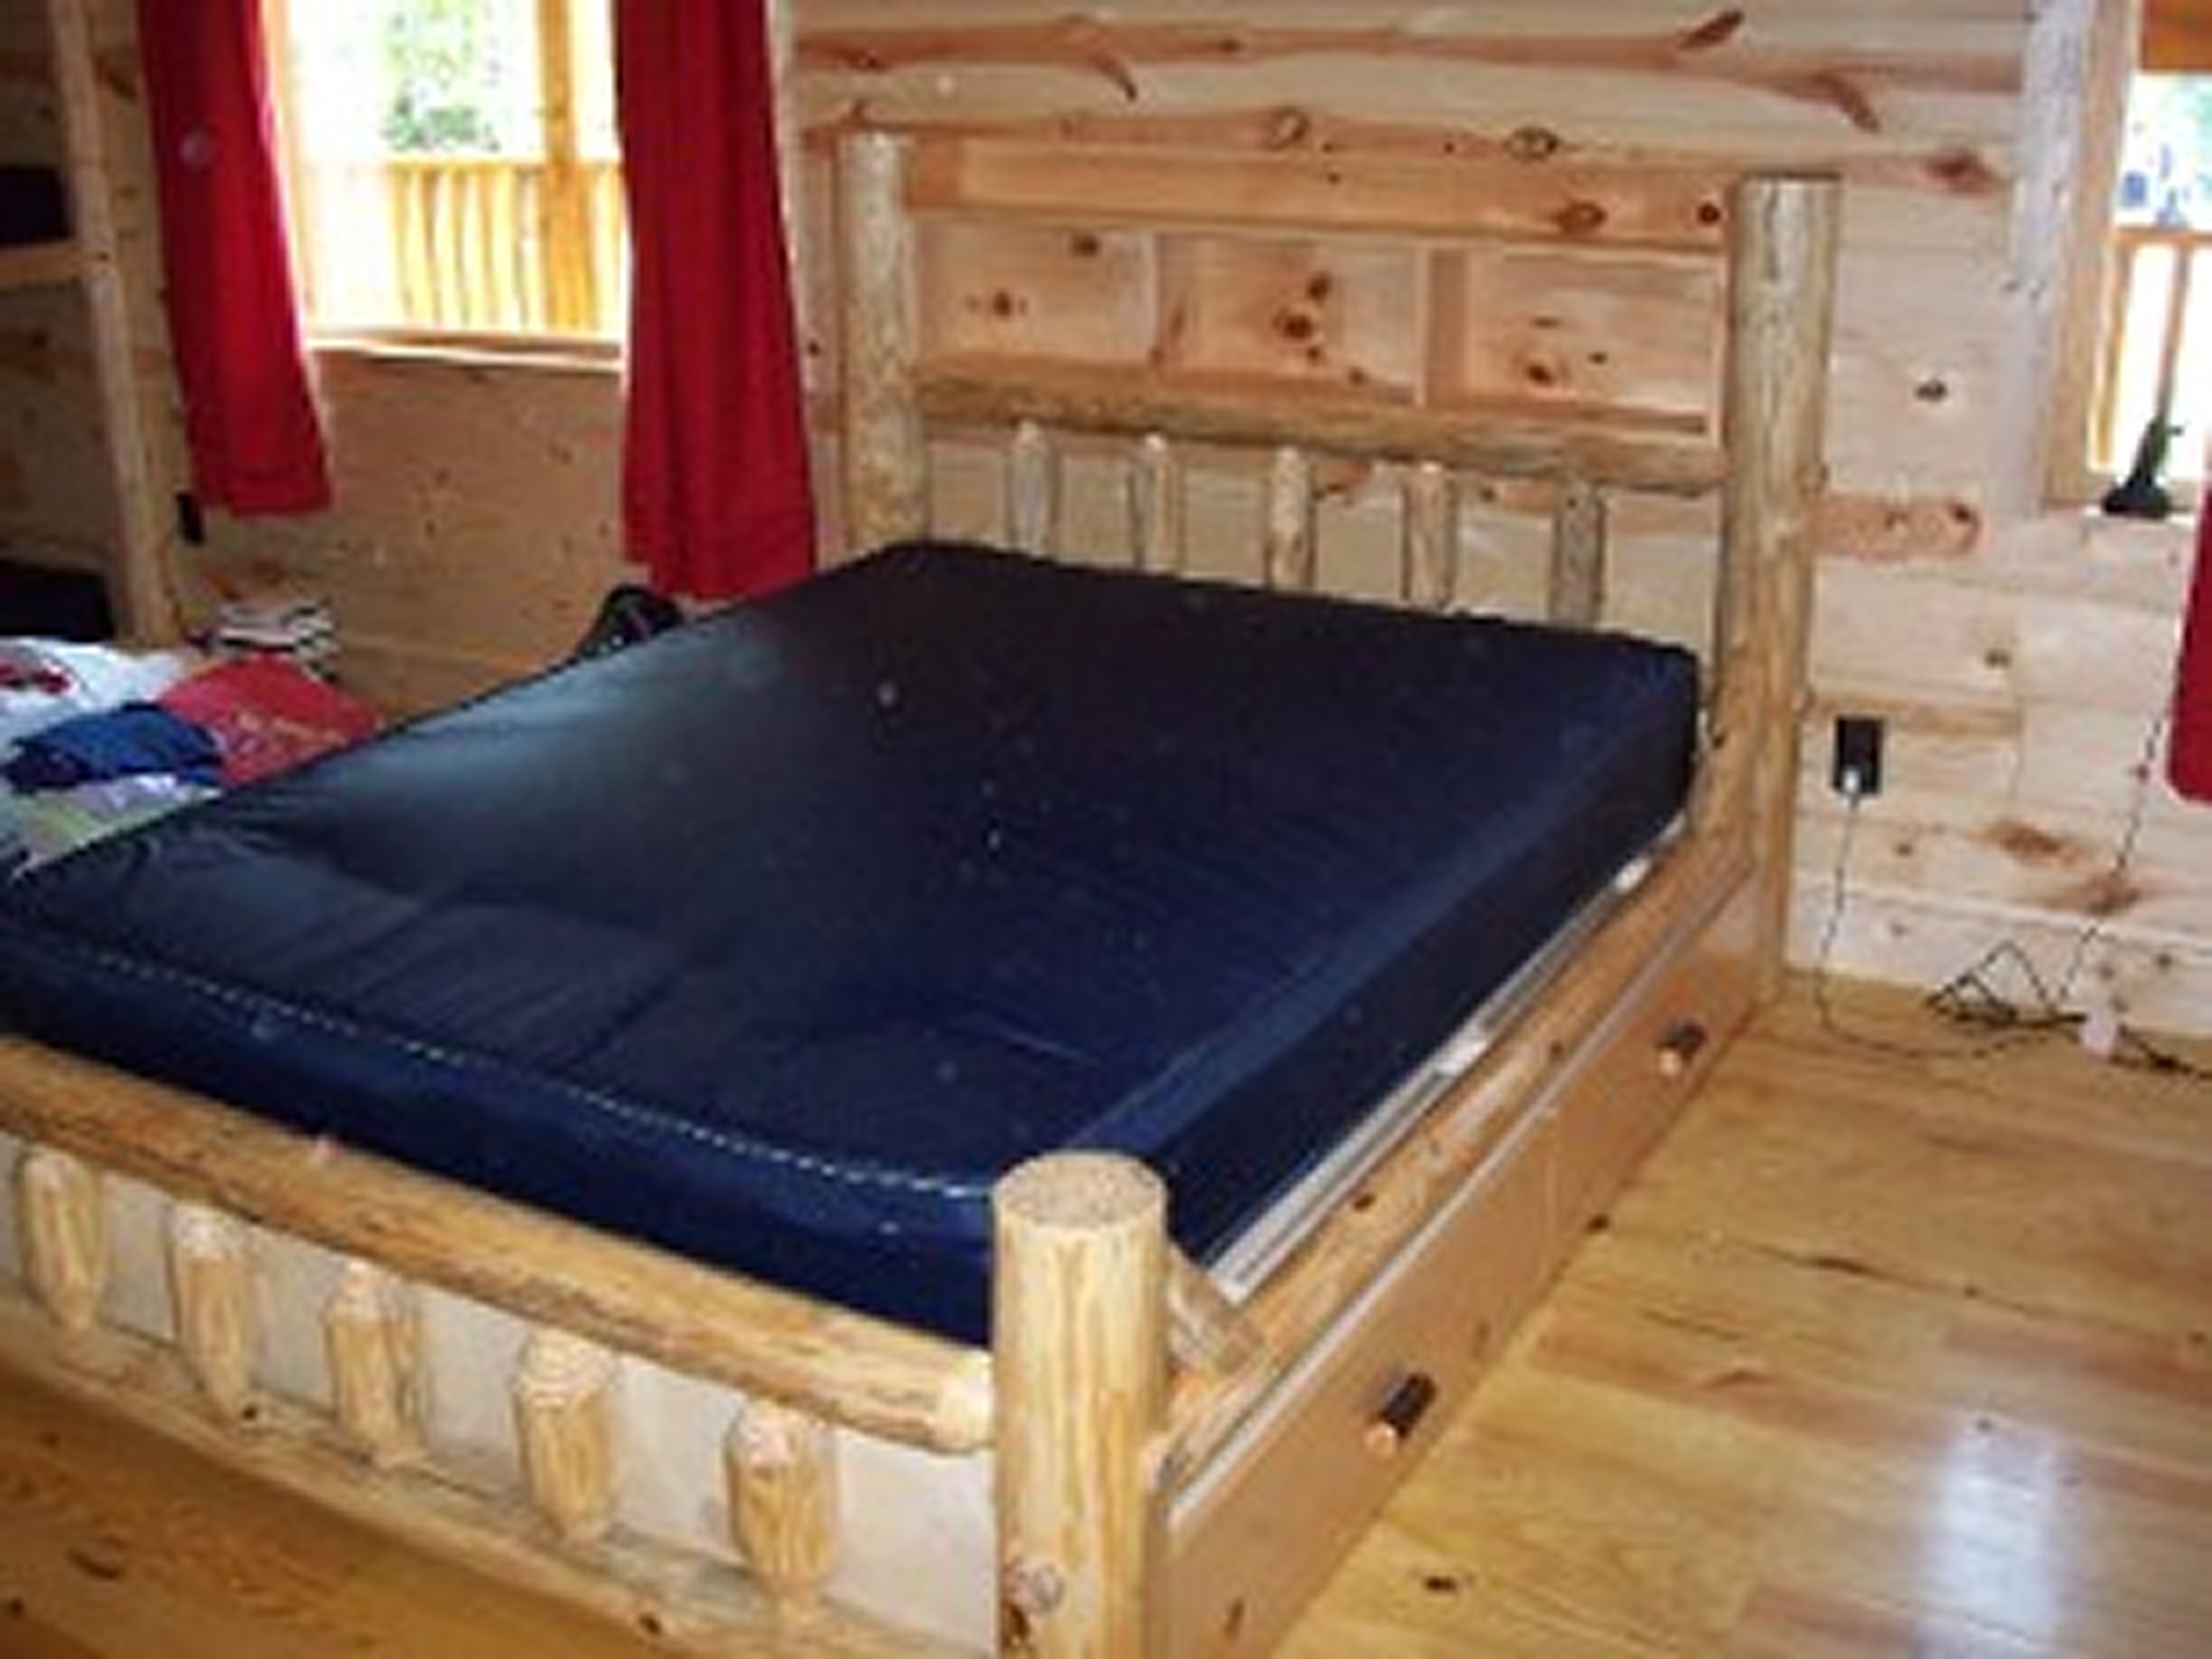 Log bed with drawers